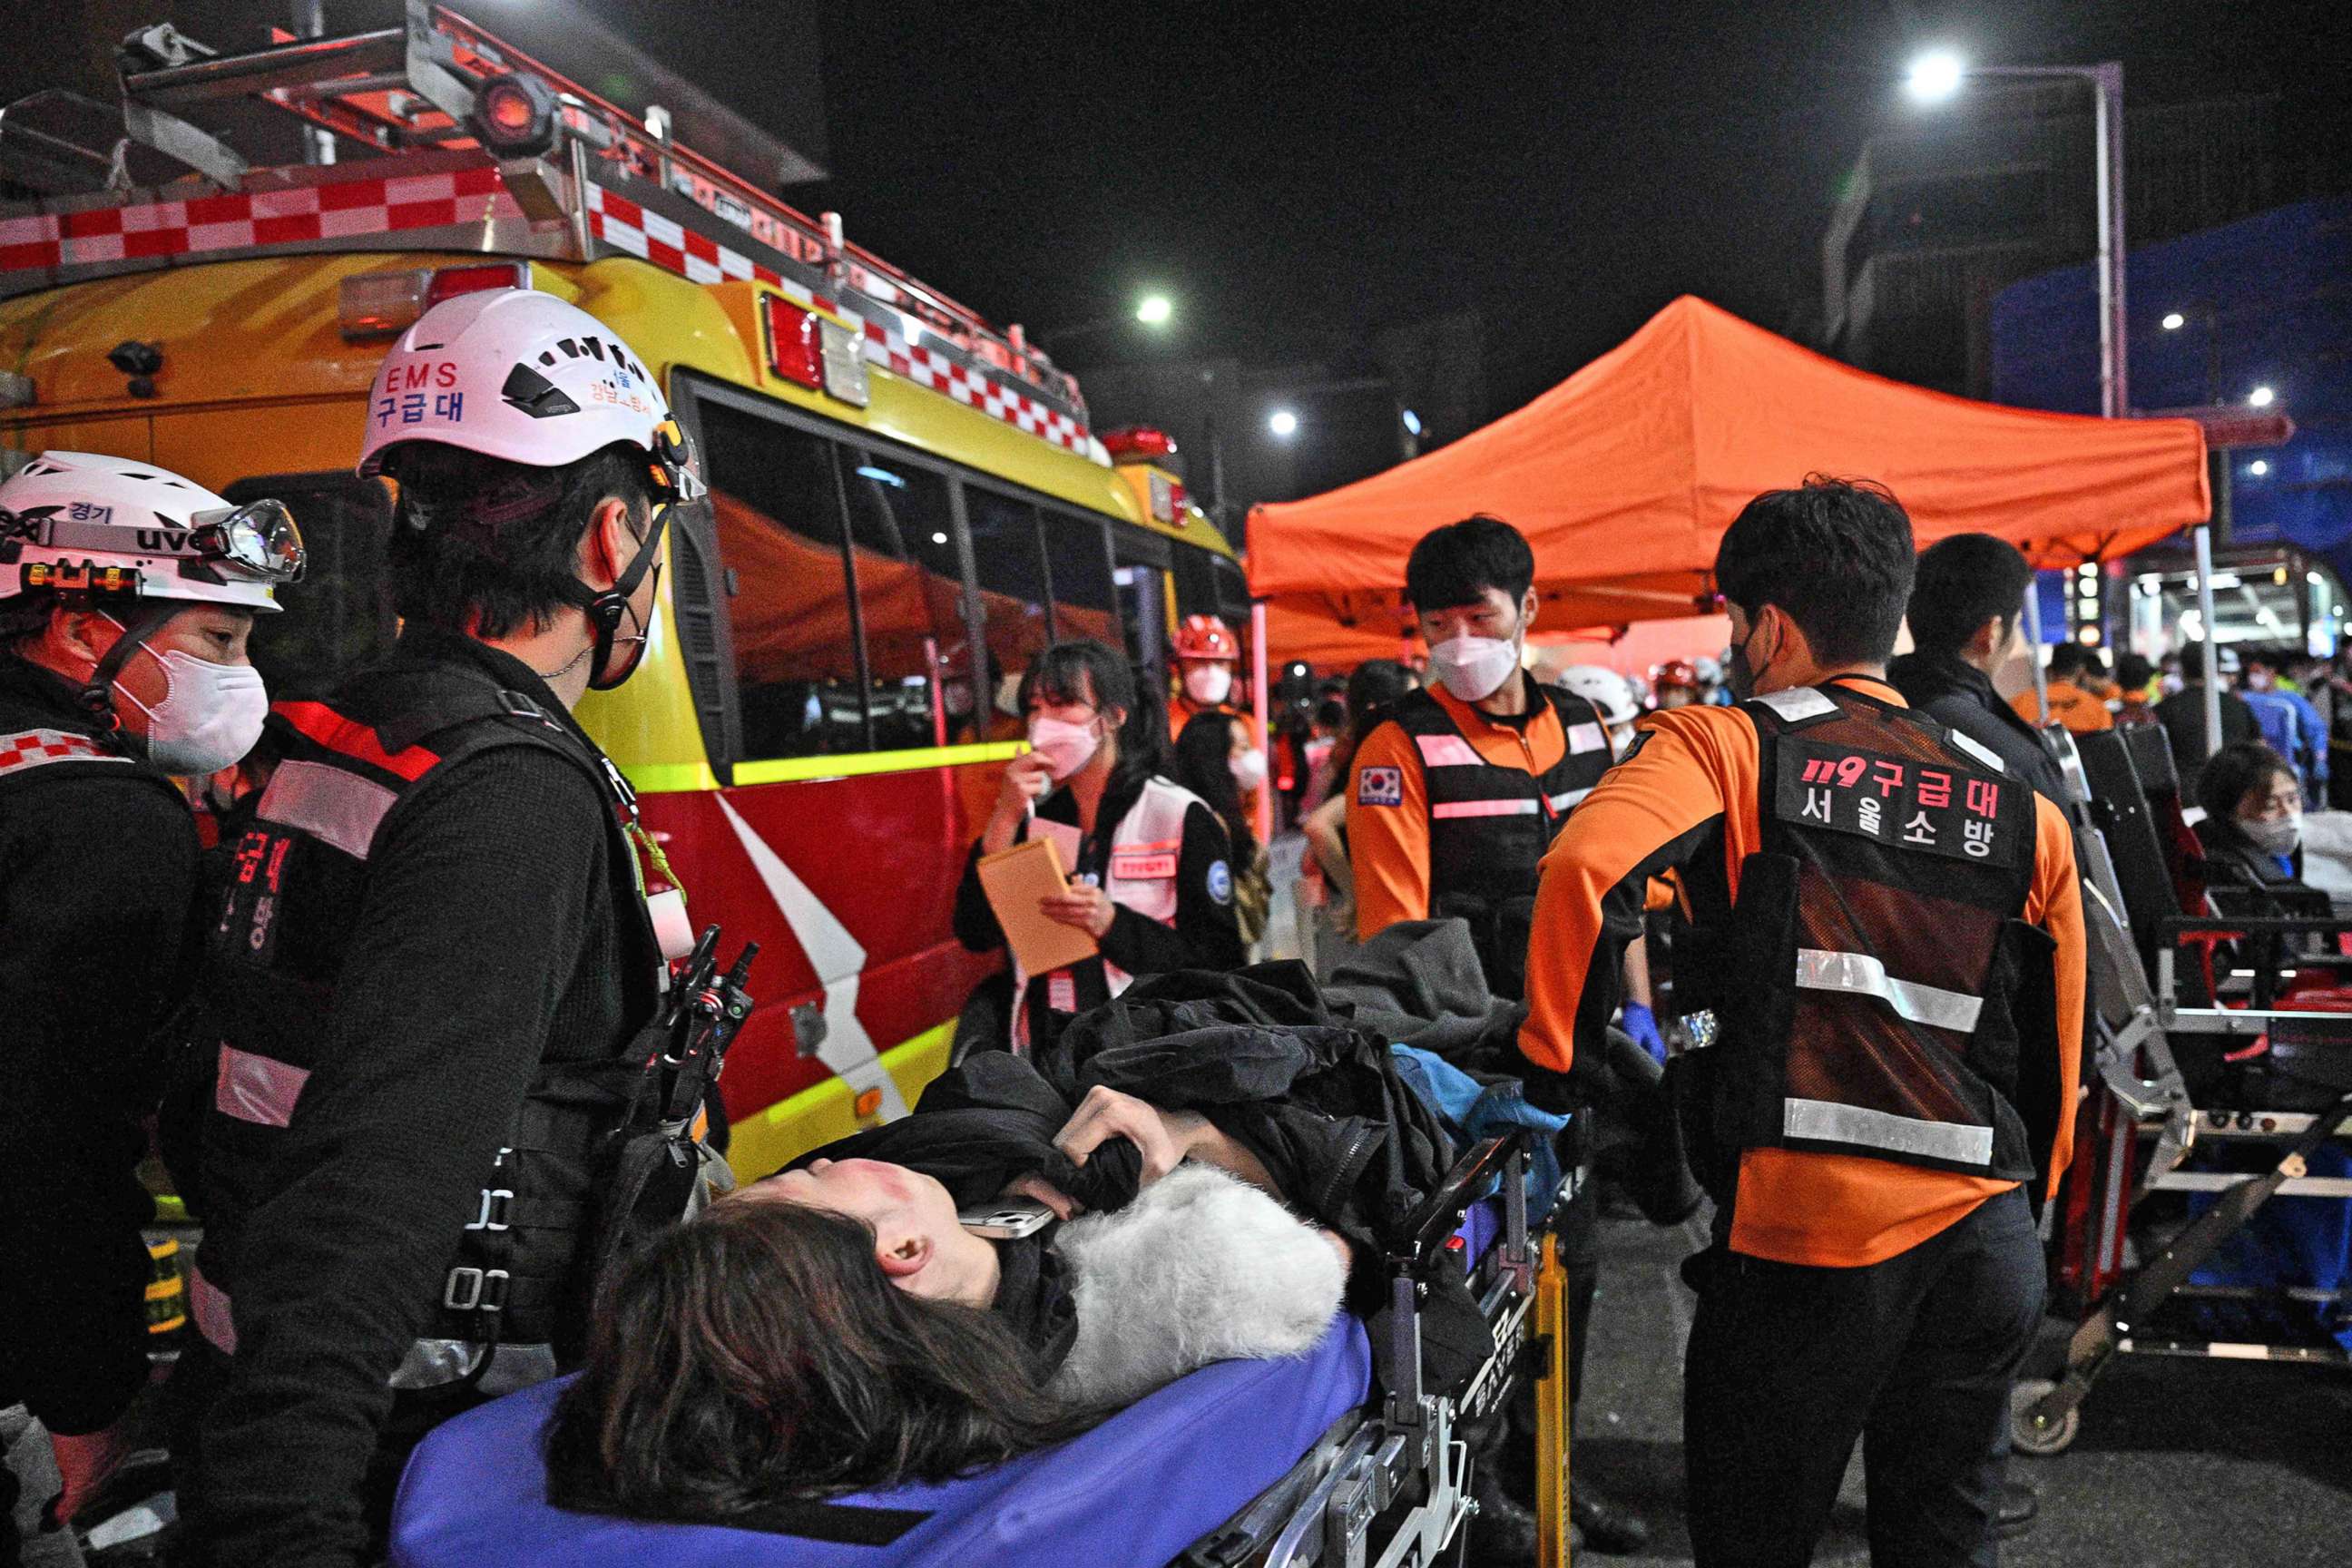 PHOTO: Medical staff attend to a person on a stretcher after dozens were injured in a stampede, after people crowded into narrow streets in the city's Itaewon neighbourhood to celebrate Halloween, in Seoul,  South Korea, on Oct. 30, 2022.